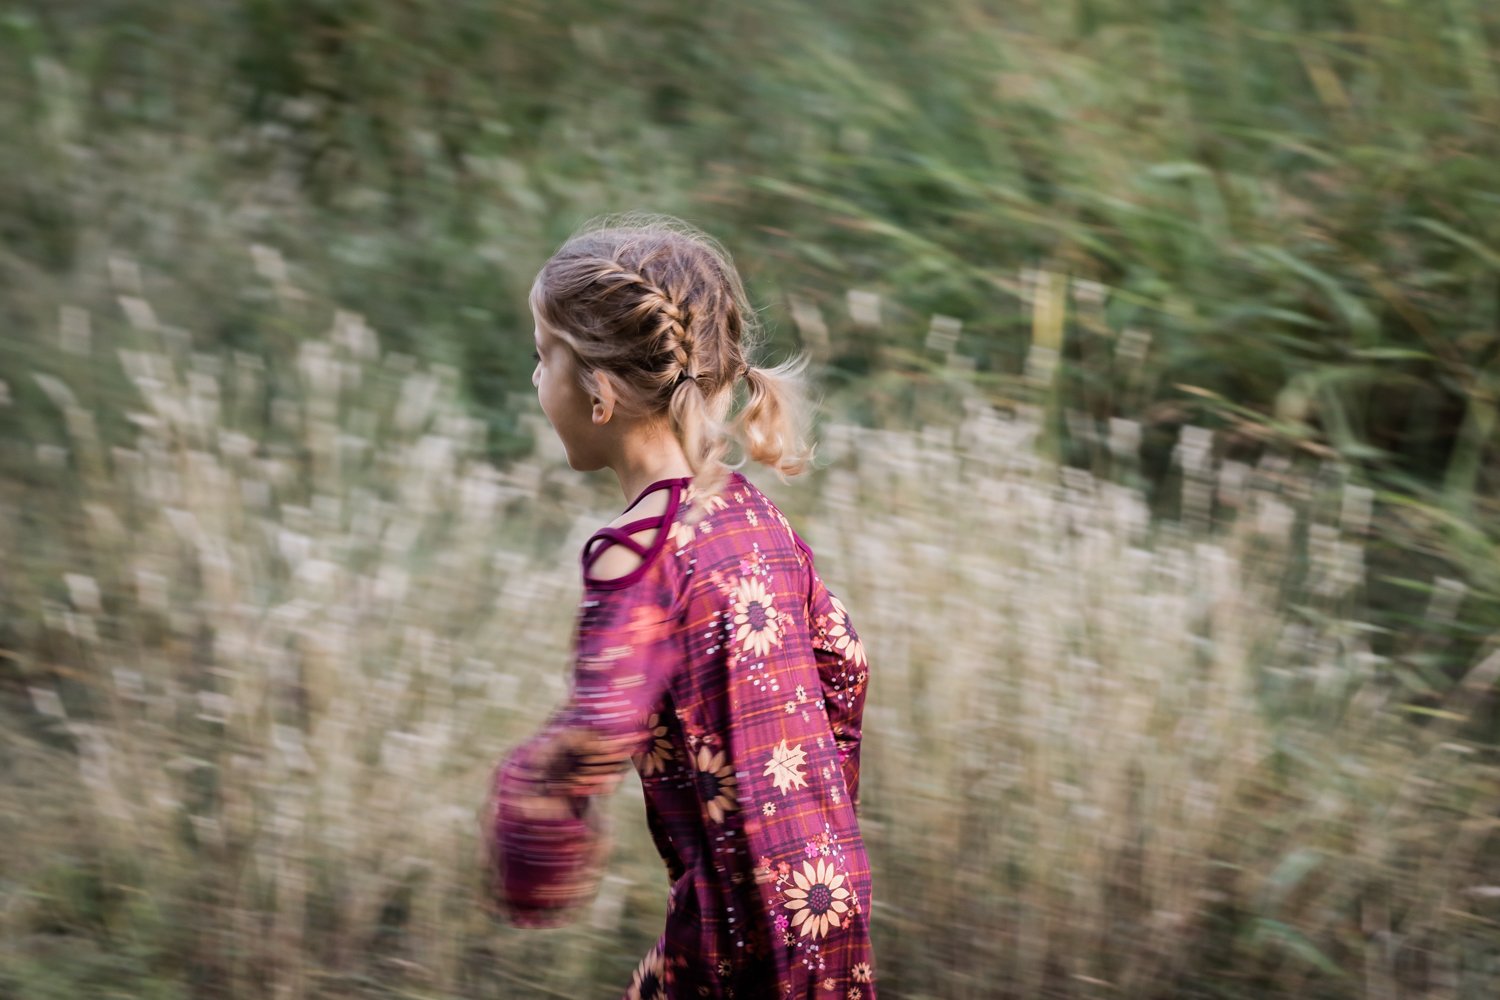 photo of young girl running